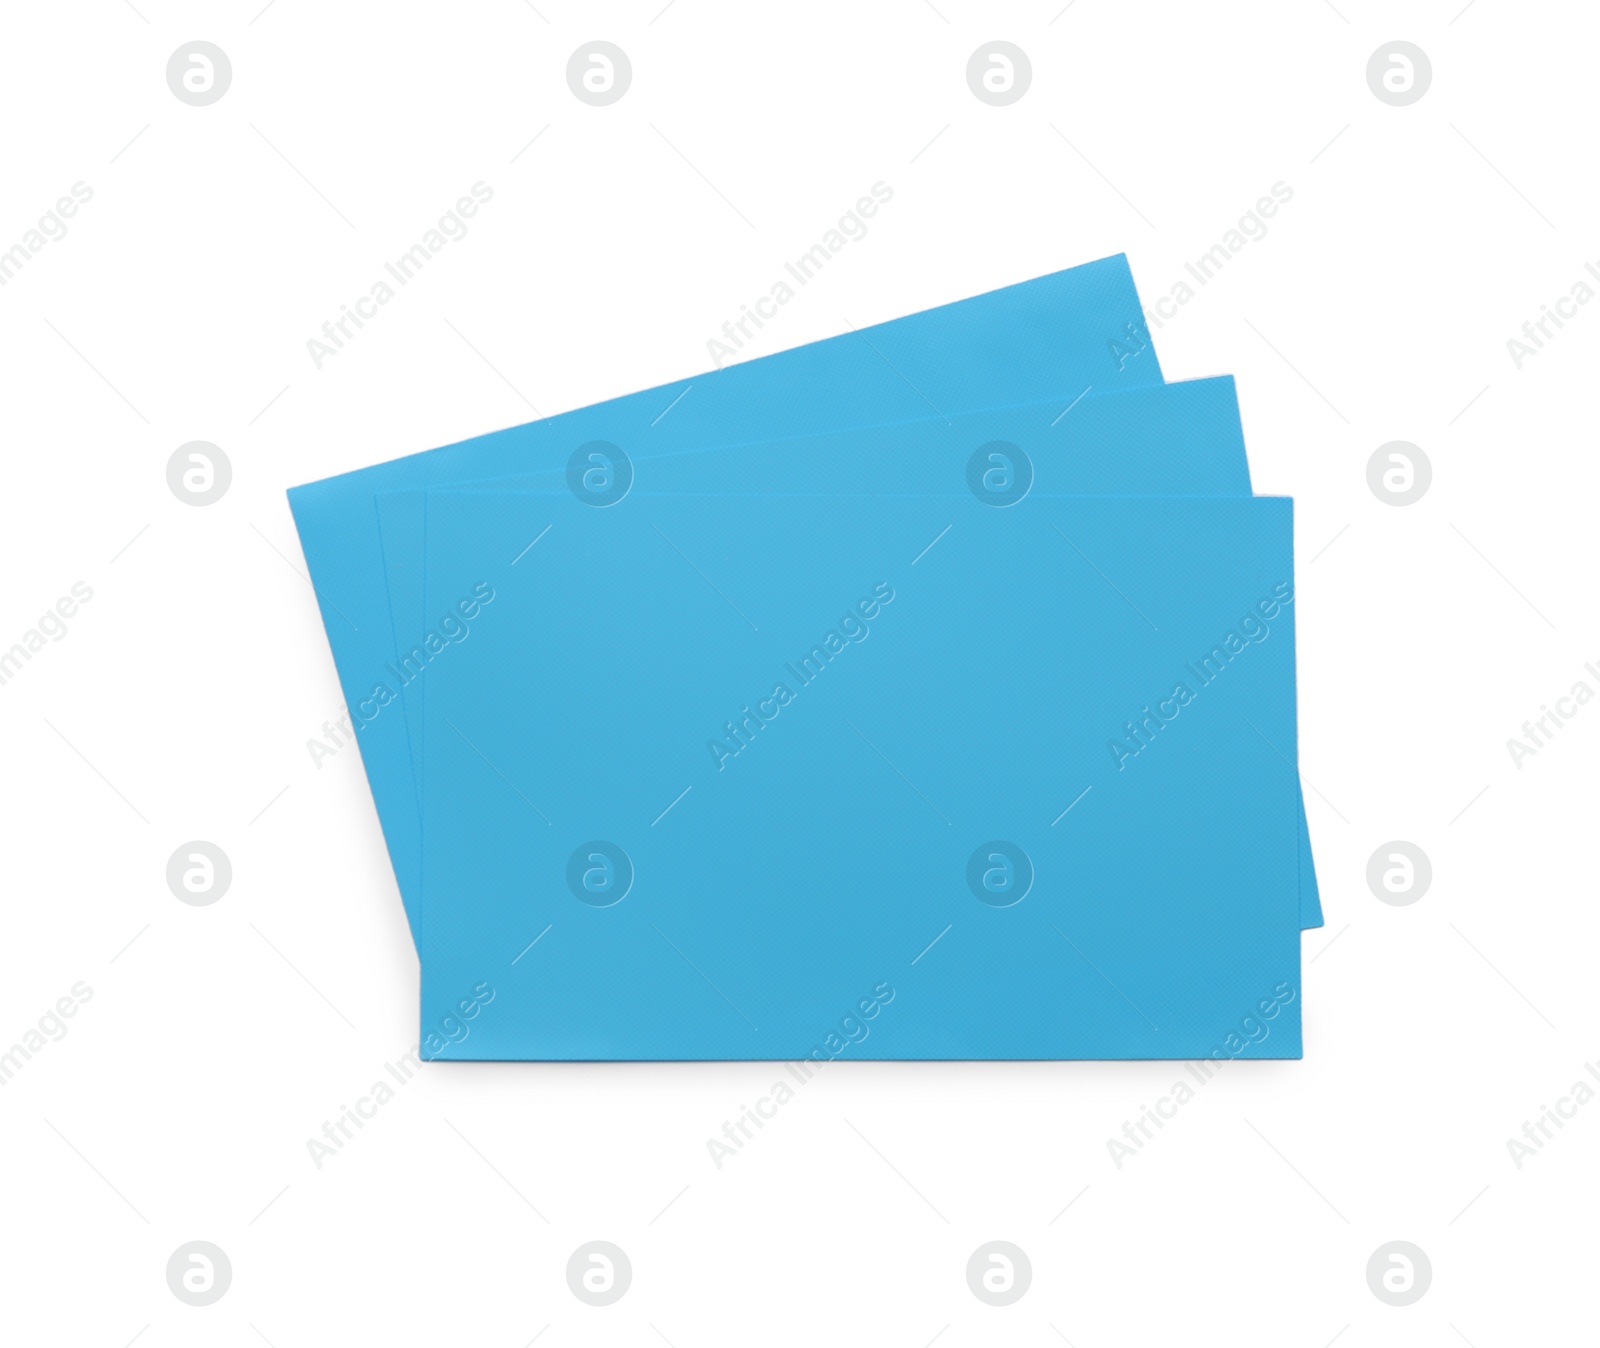 Photo of Facial oil blotting tissues on white background, top view